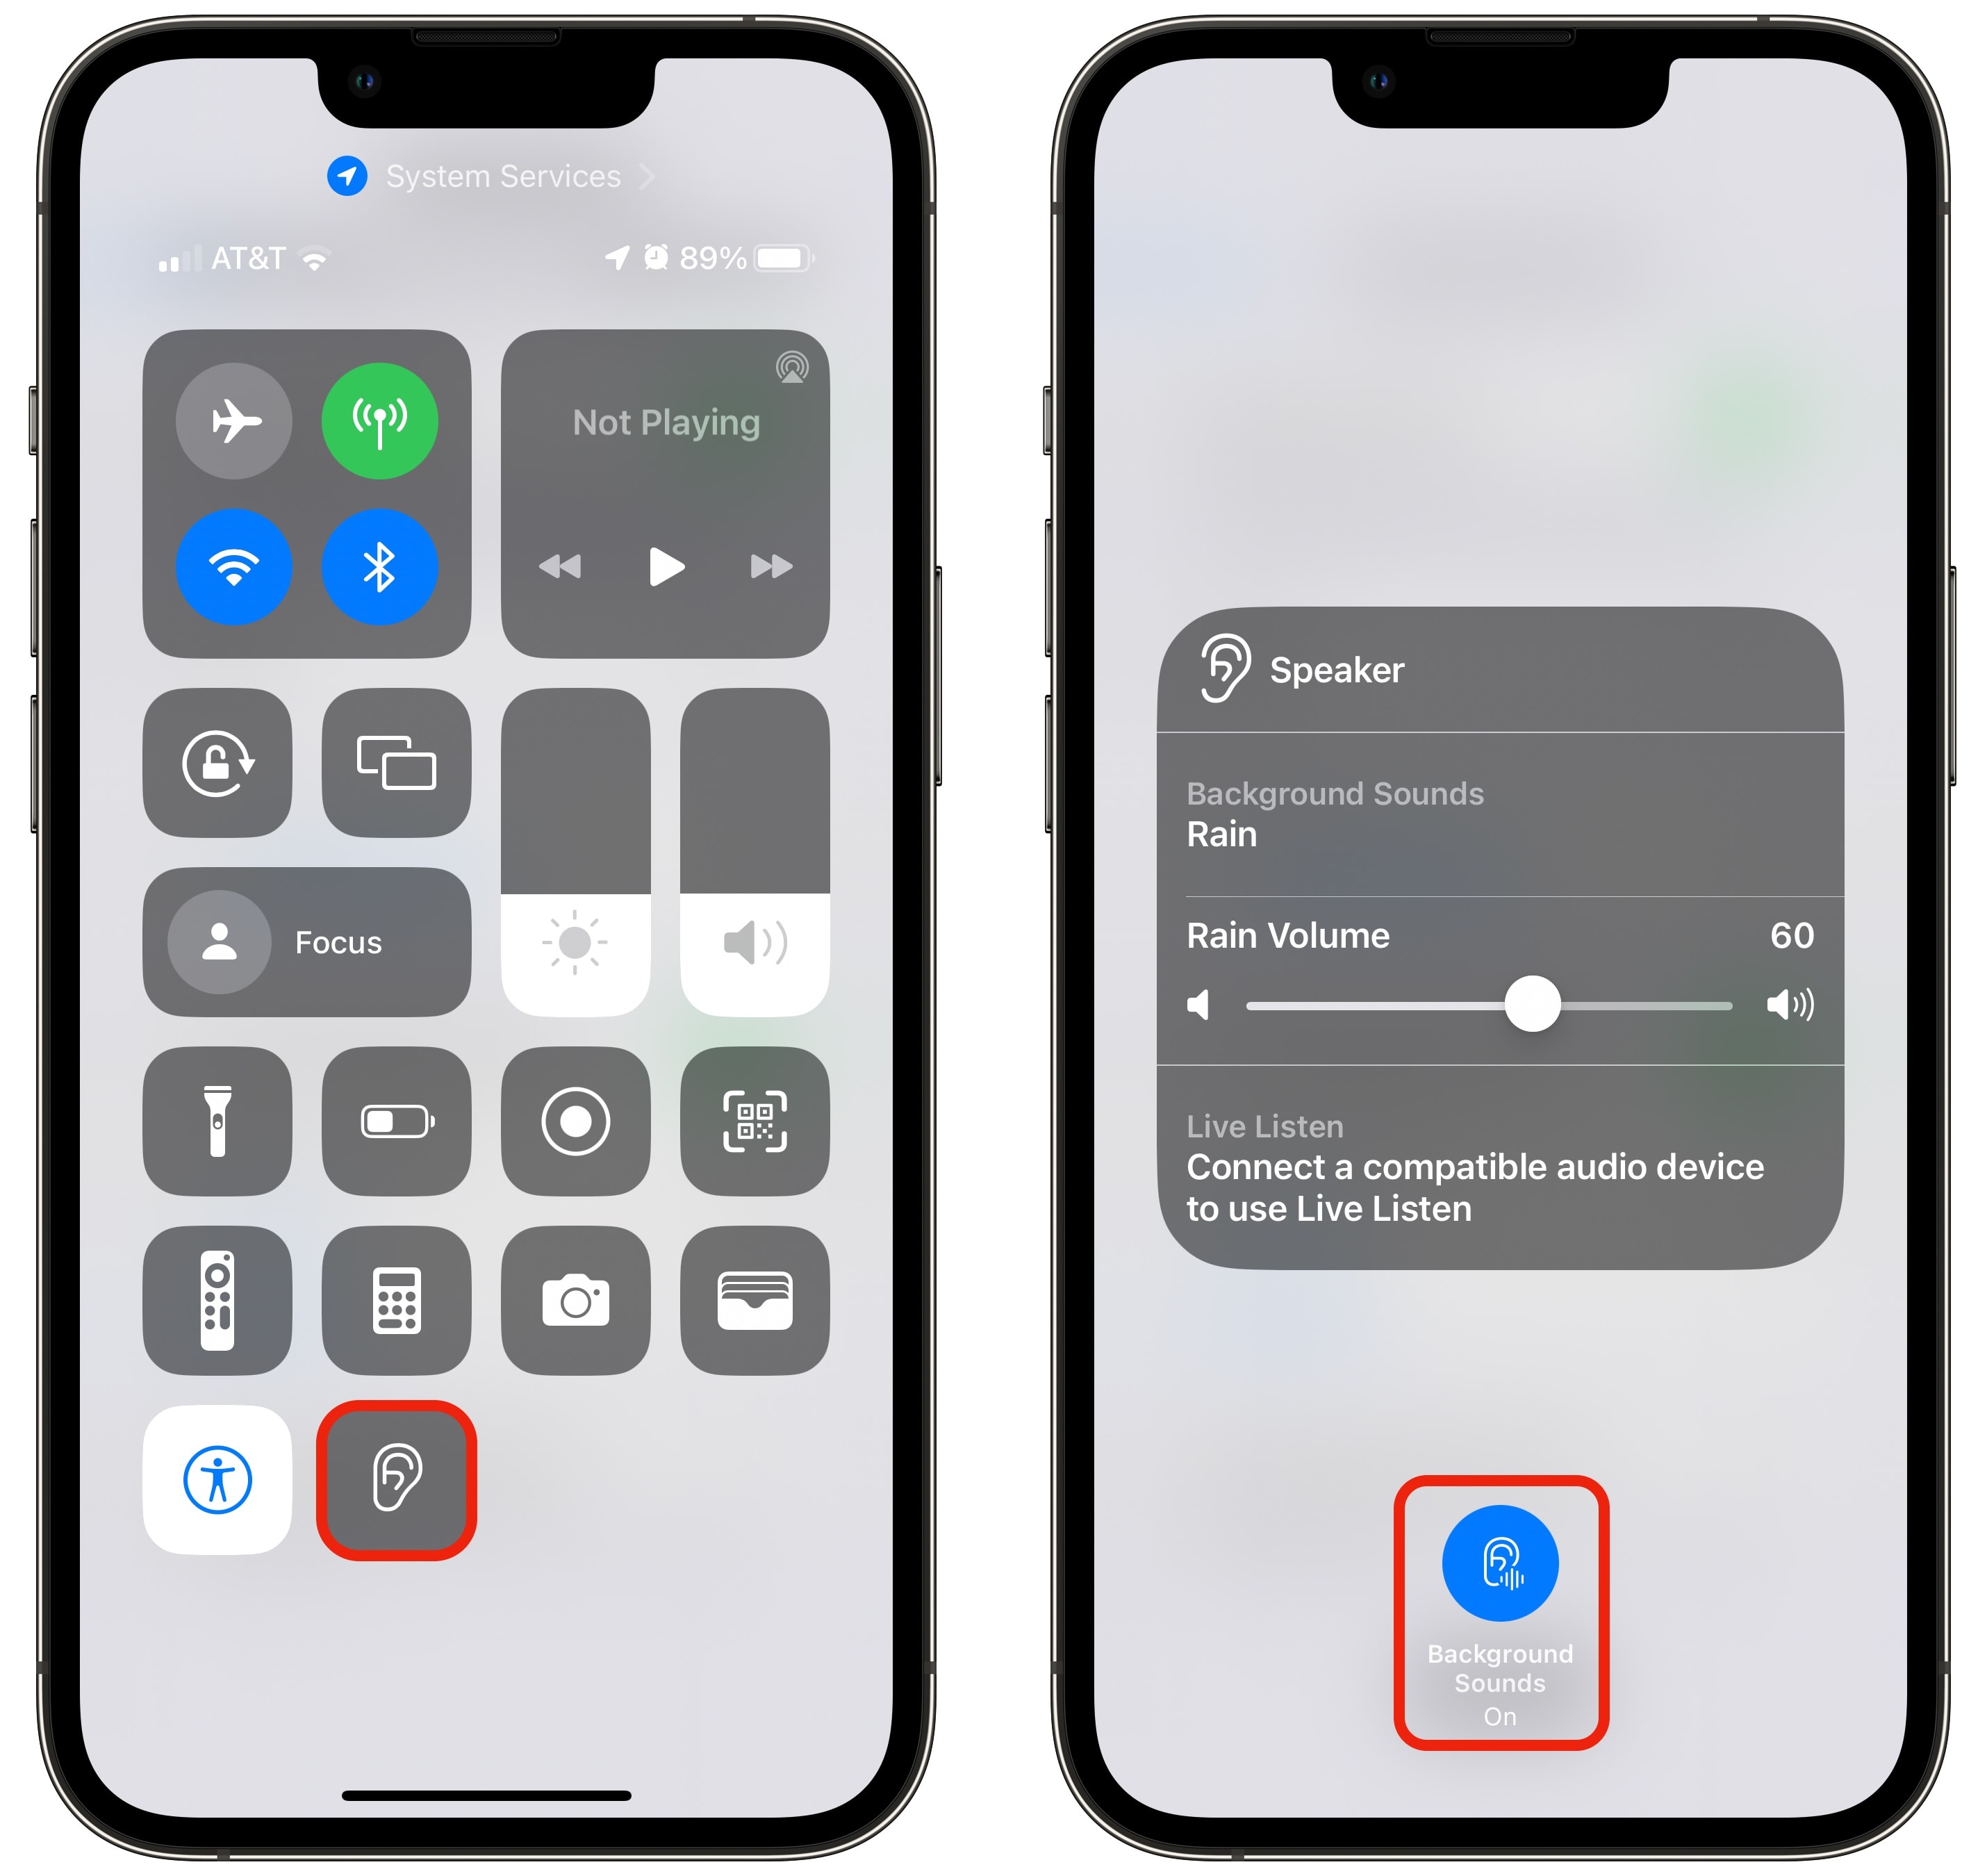 Turning on Background Sounds in Control Center.